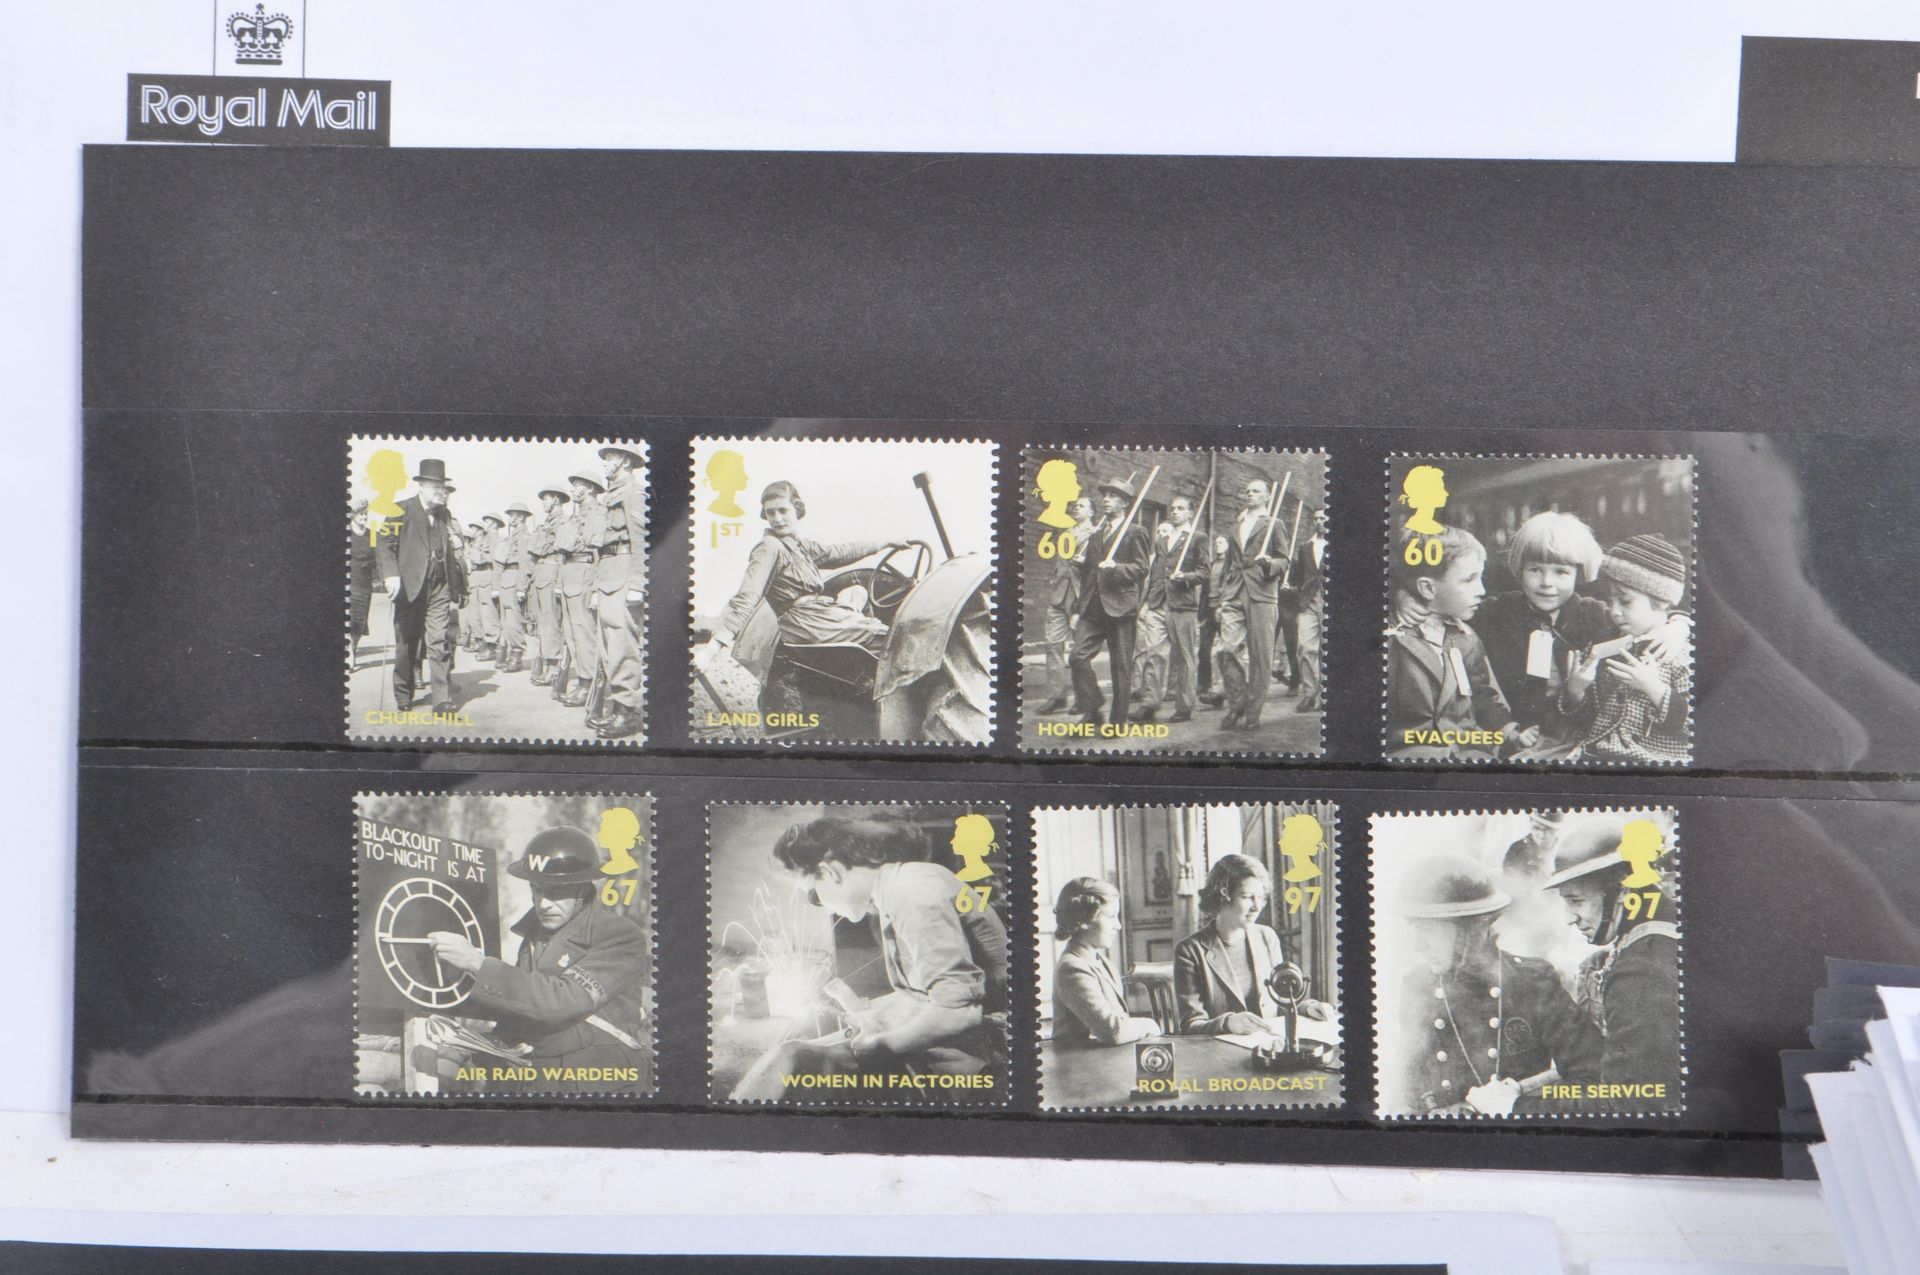 COLLECTION OF 21ST CENTURY BRITISH POSTAGE STAMPS - Image 2 of 7